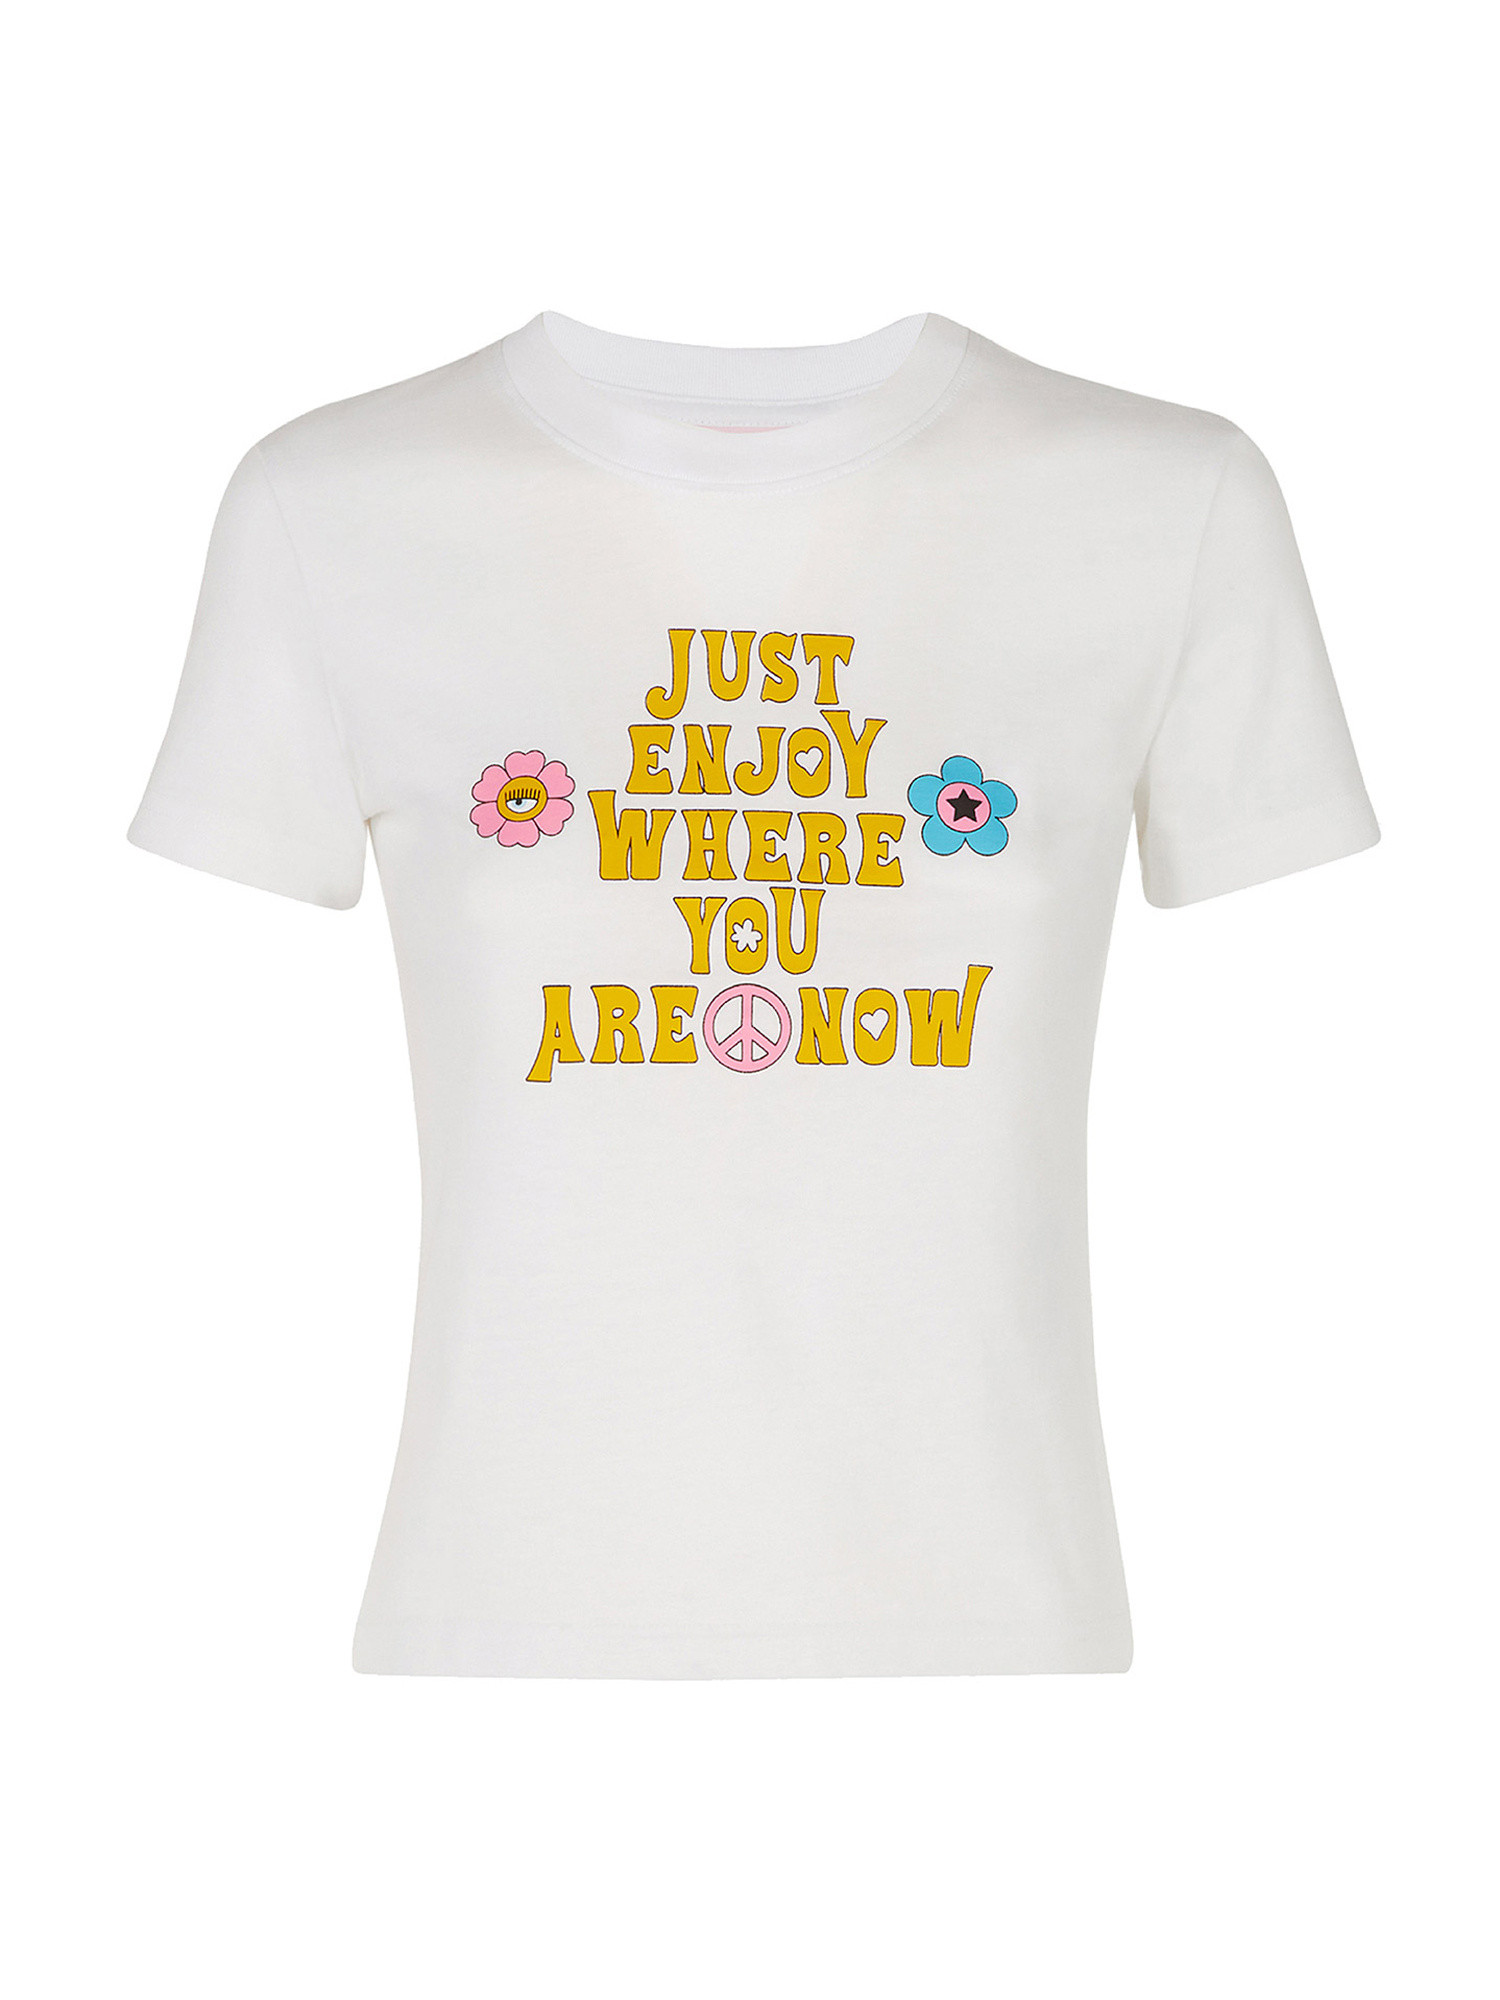 Enjoy Where You Are Now print t-shir, White, large image number 0